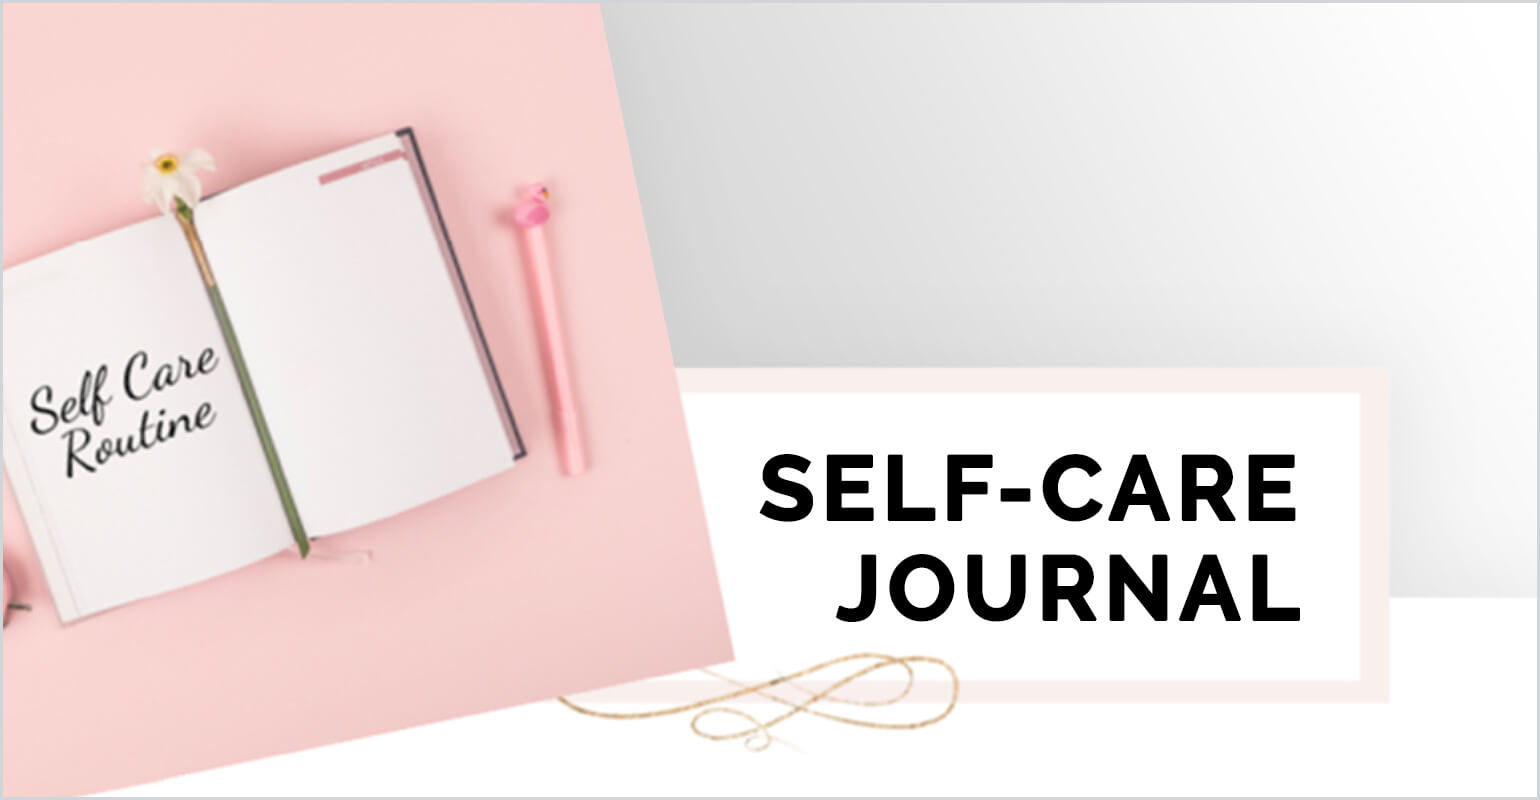 An open book with the words 'Self Care Routine' written on the left page. The book has a daisy for a bookmark and a pink, flamingo pen rests next to the book. To the right of the book and pen are the large, bold words that say 'Self-care Journal'.